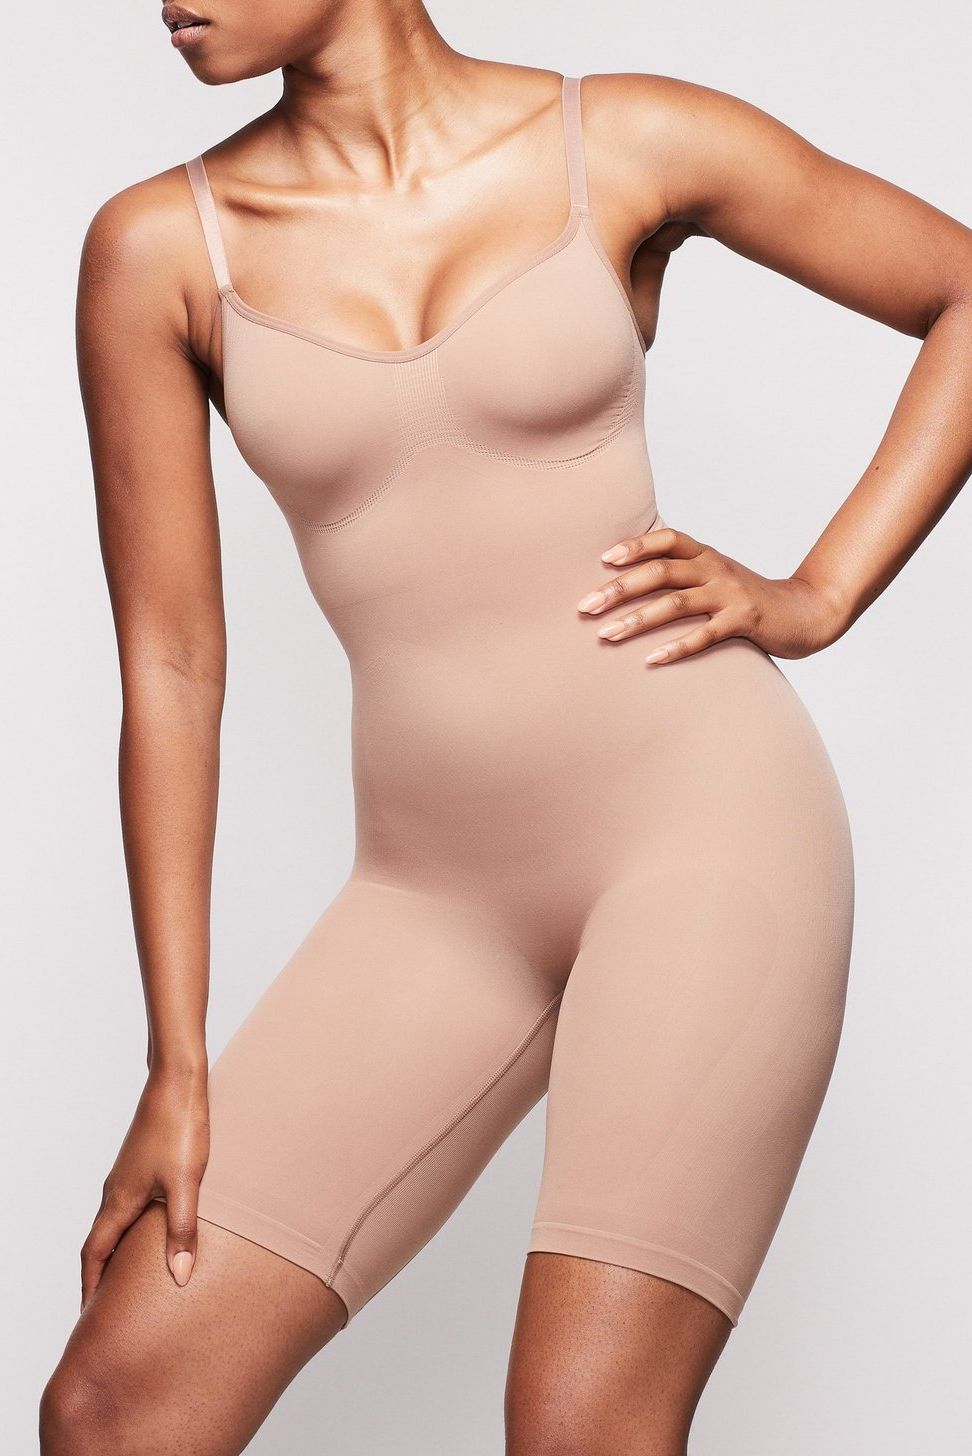 19 top Best Shapewear for Tummy and Waist Singapore Reviews ideas in 2024